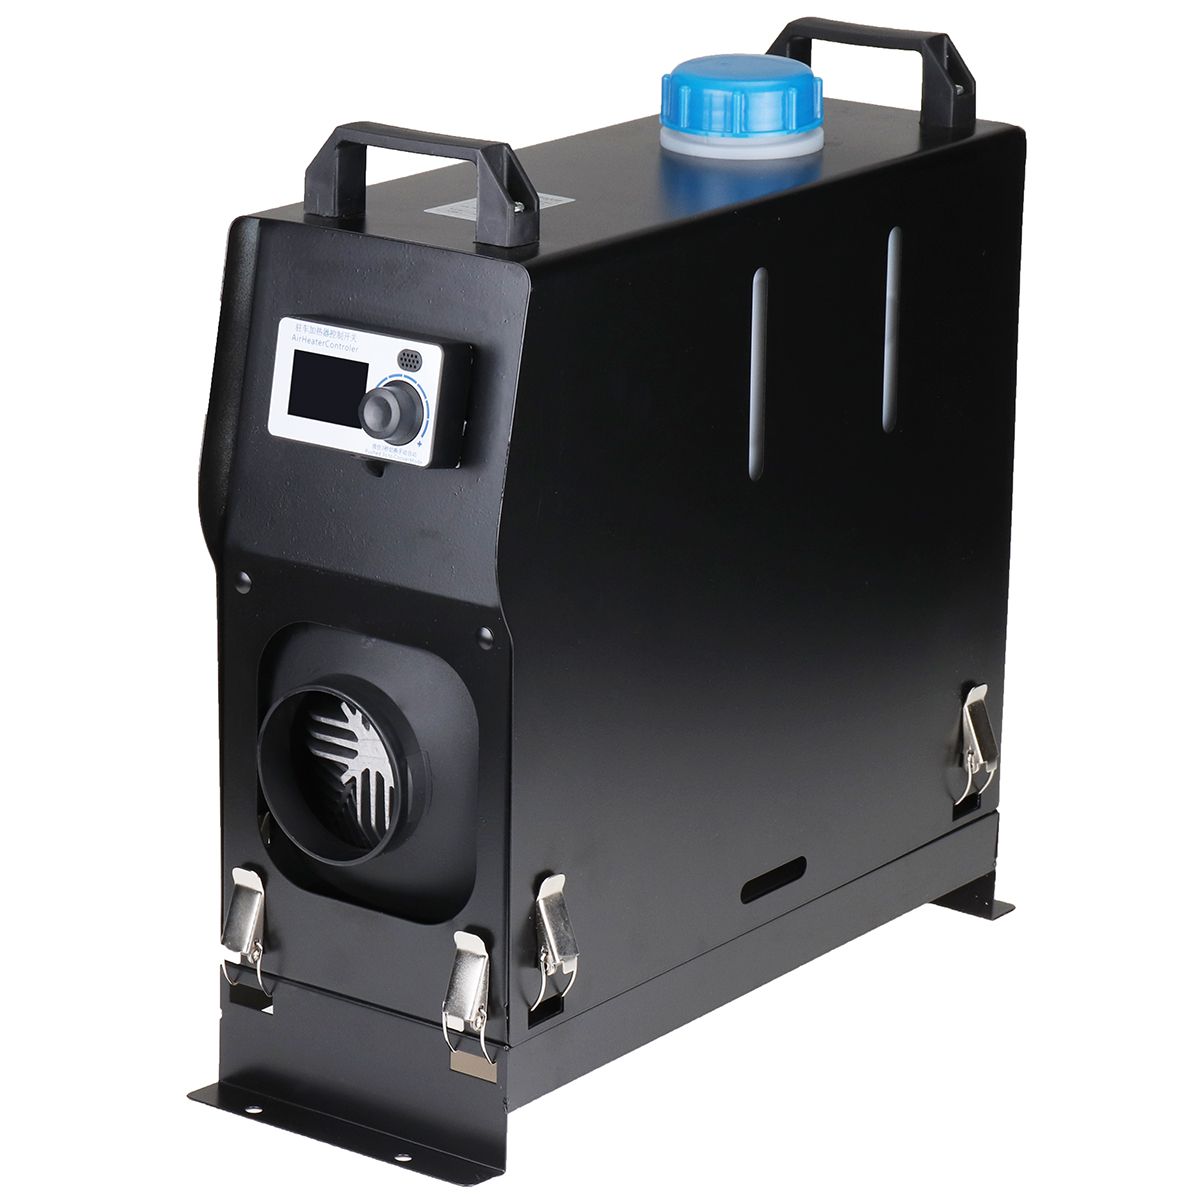 12V-5KW-Air-Diesel-Heater-Parking-Heater-All-In-One-LCD-Display-with-Remote-control-1392123